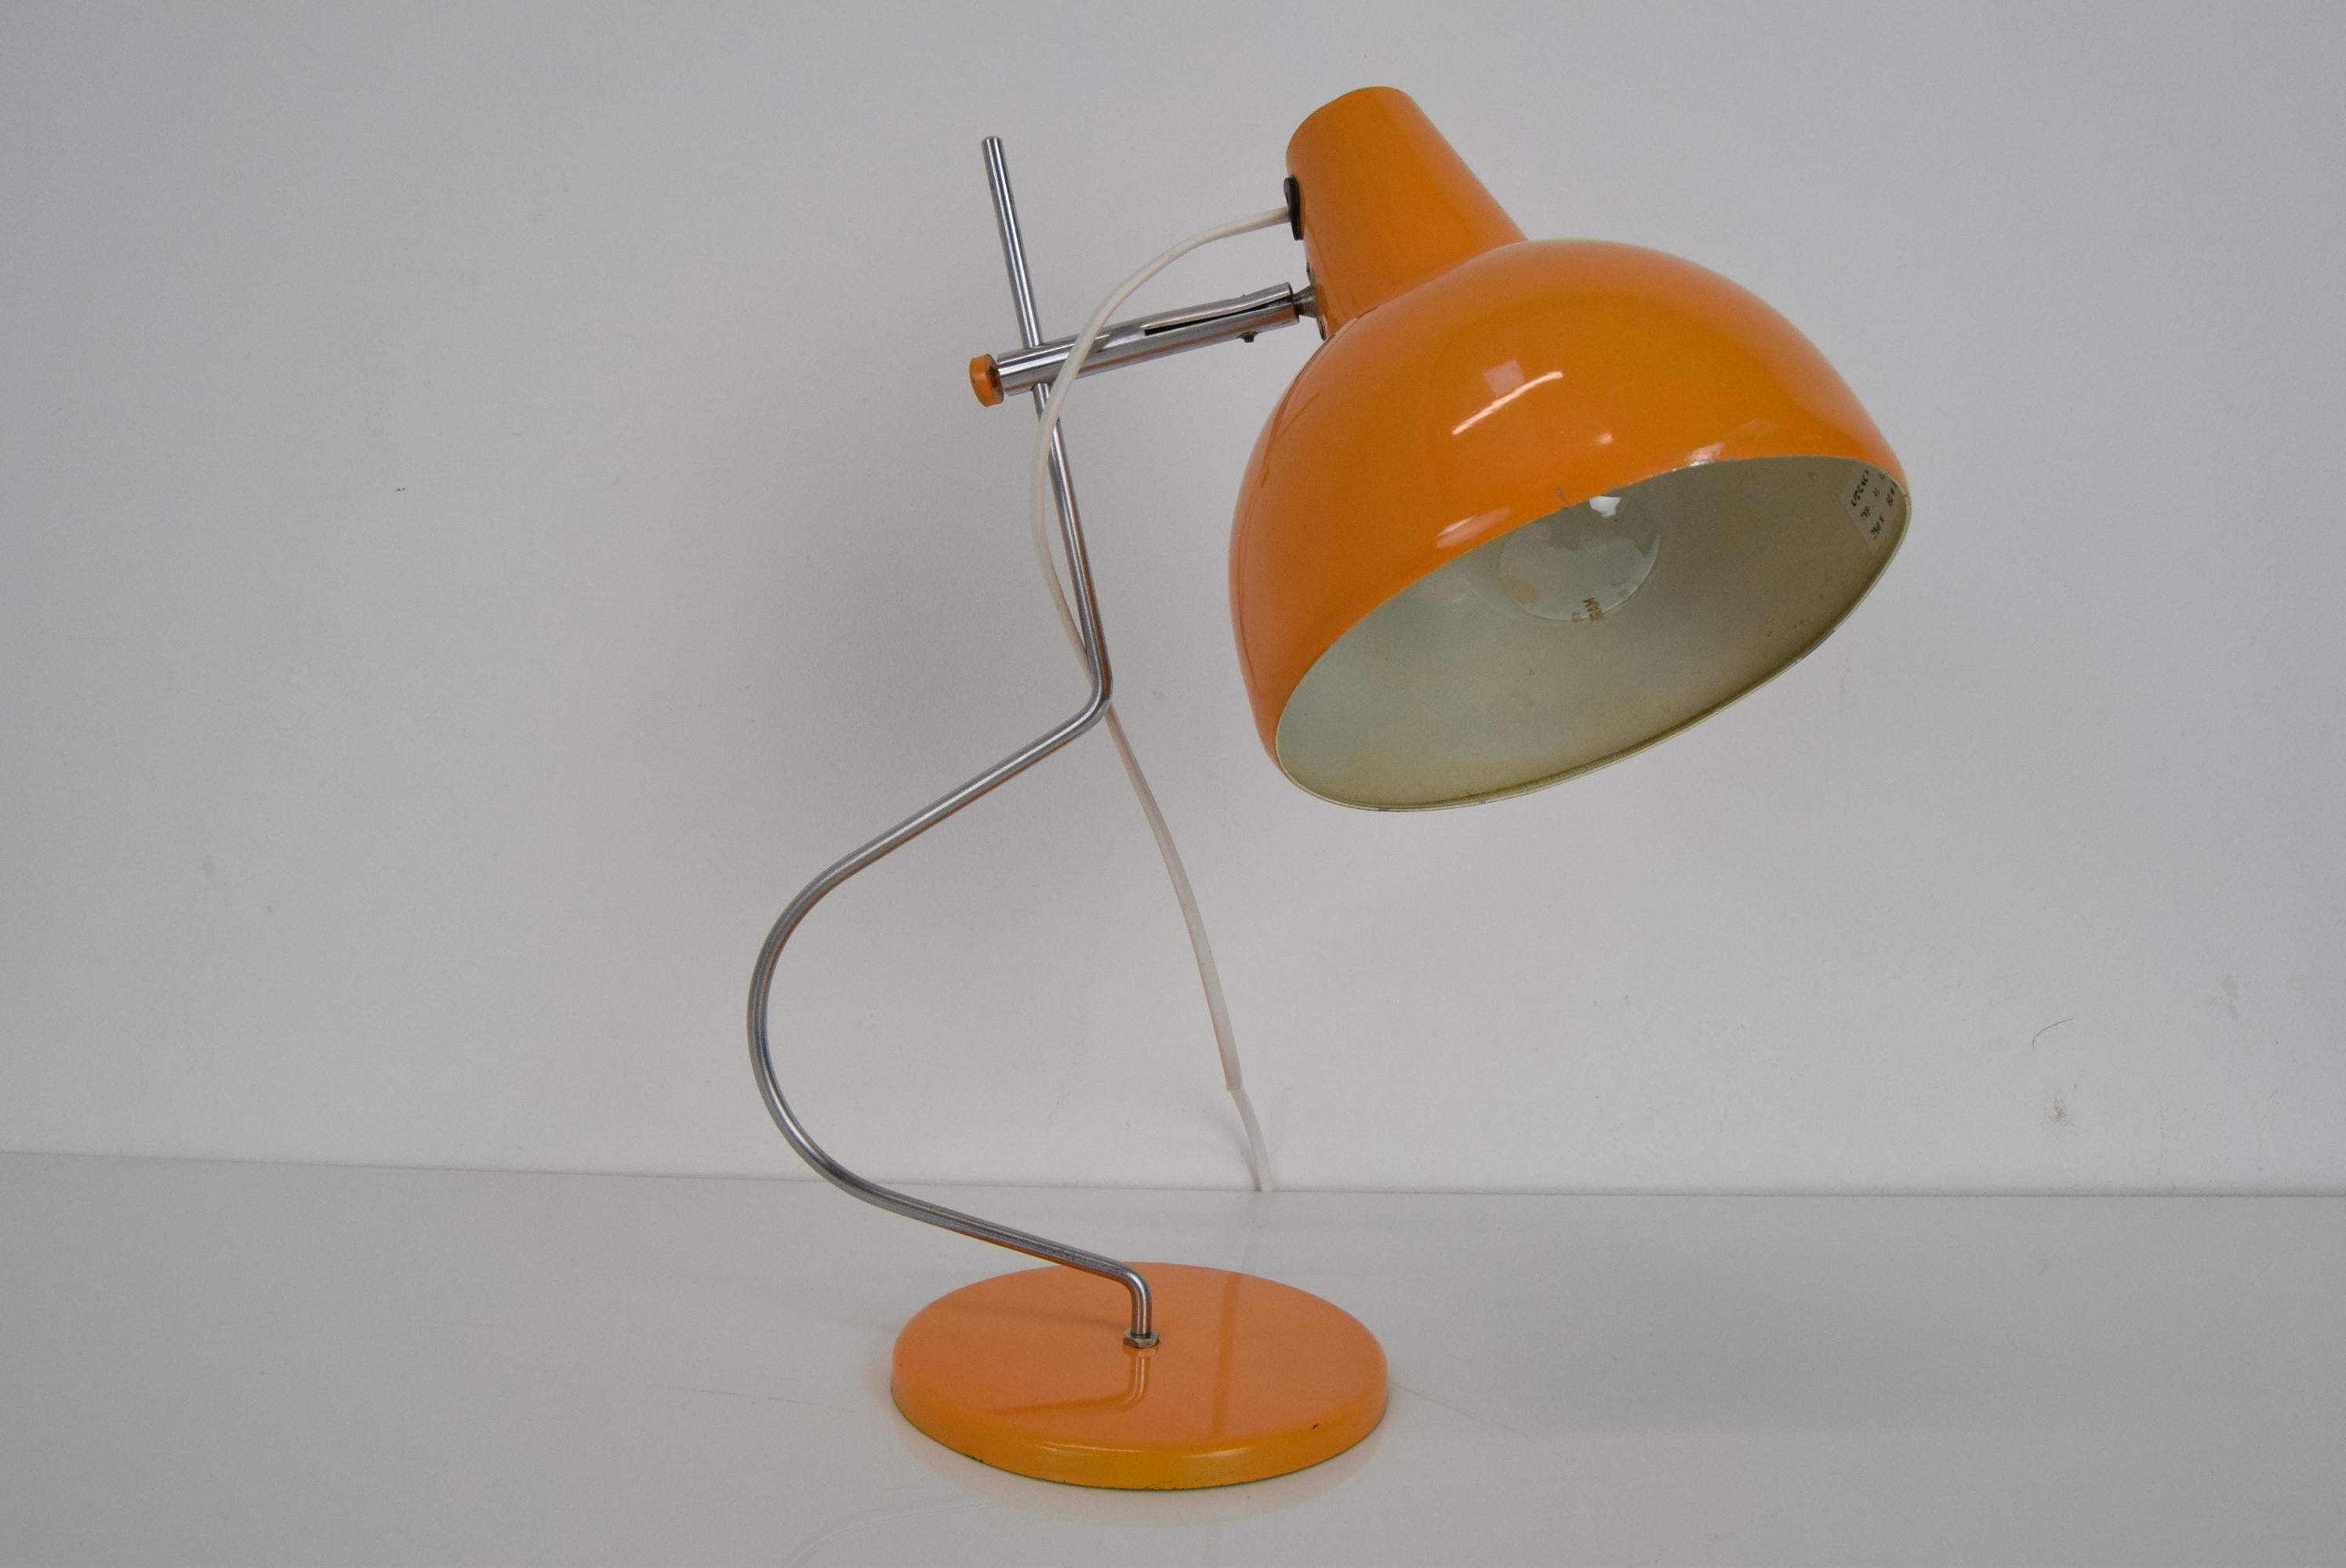 Made in Czechoslovakia
Made of Lacquered metal,Chrome
Adjustable shade
With aged patina,shade has light dents
Was installed new wiring
1x60W,E27 or E26 bulb
US adapter included
Original condition.